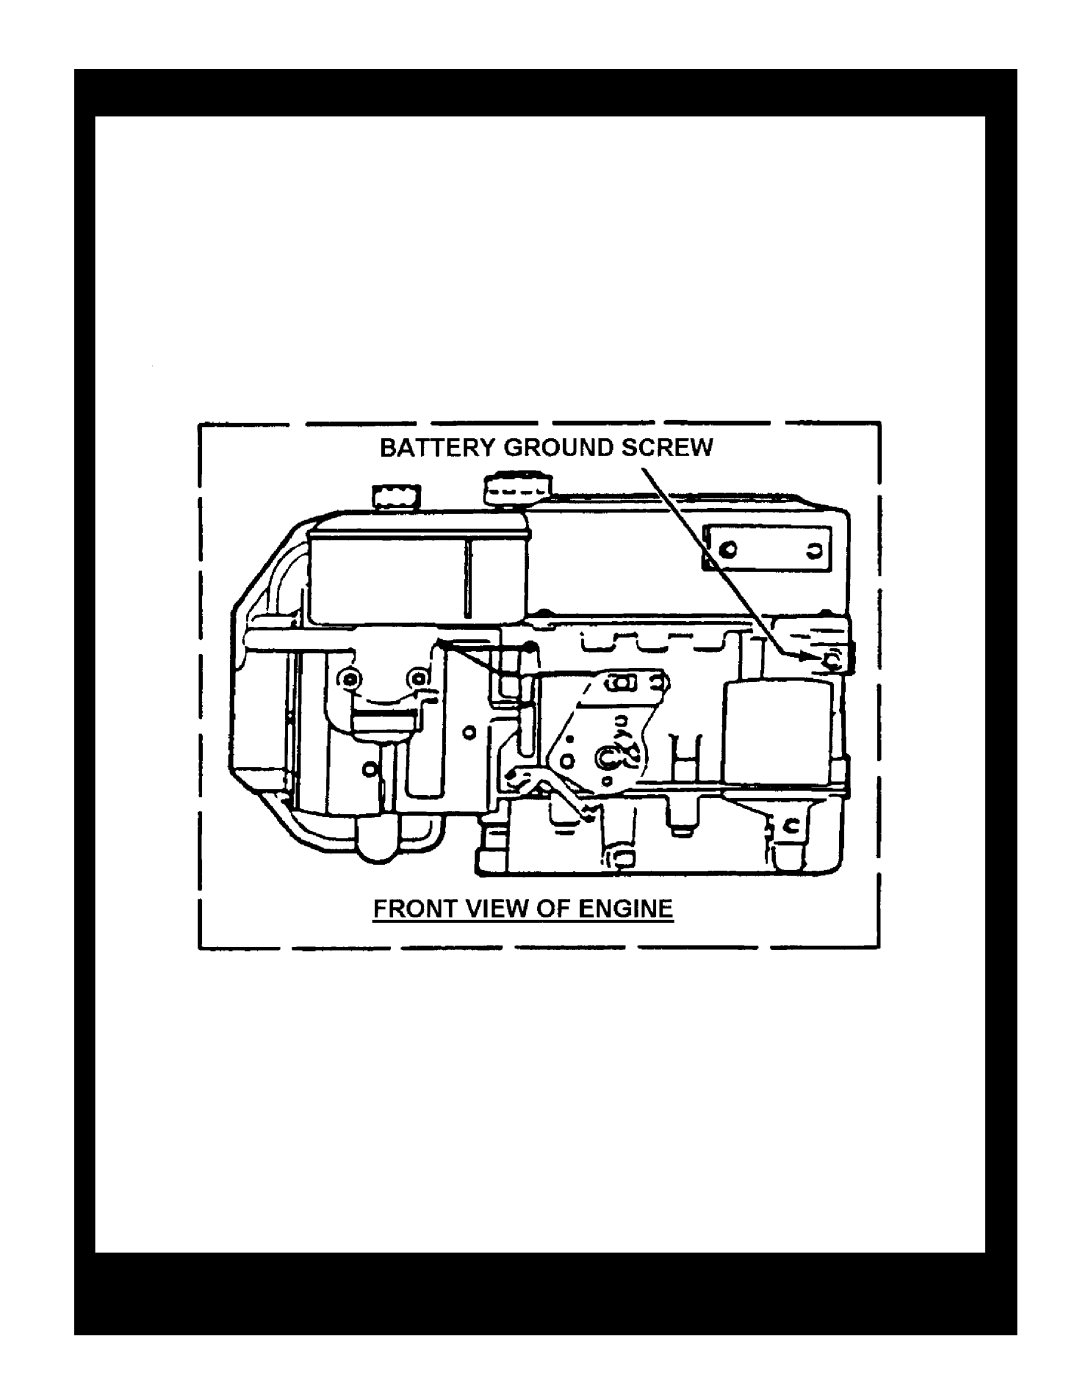 Snapper 84871 manual ELECTRICAL SYSTEMS Kohler Magneto Ground, Reproduction, Manual No, 7006279, 28 & 33 Hi-Vac, Series 